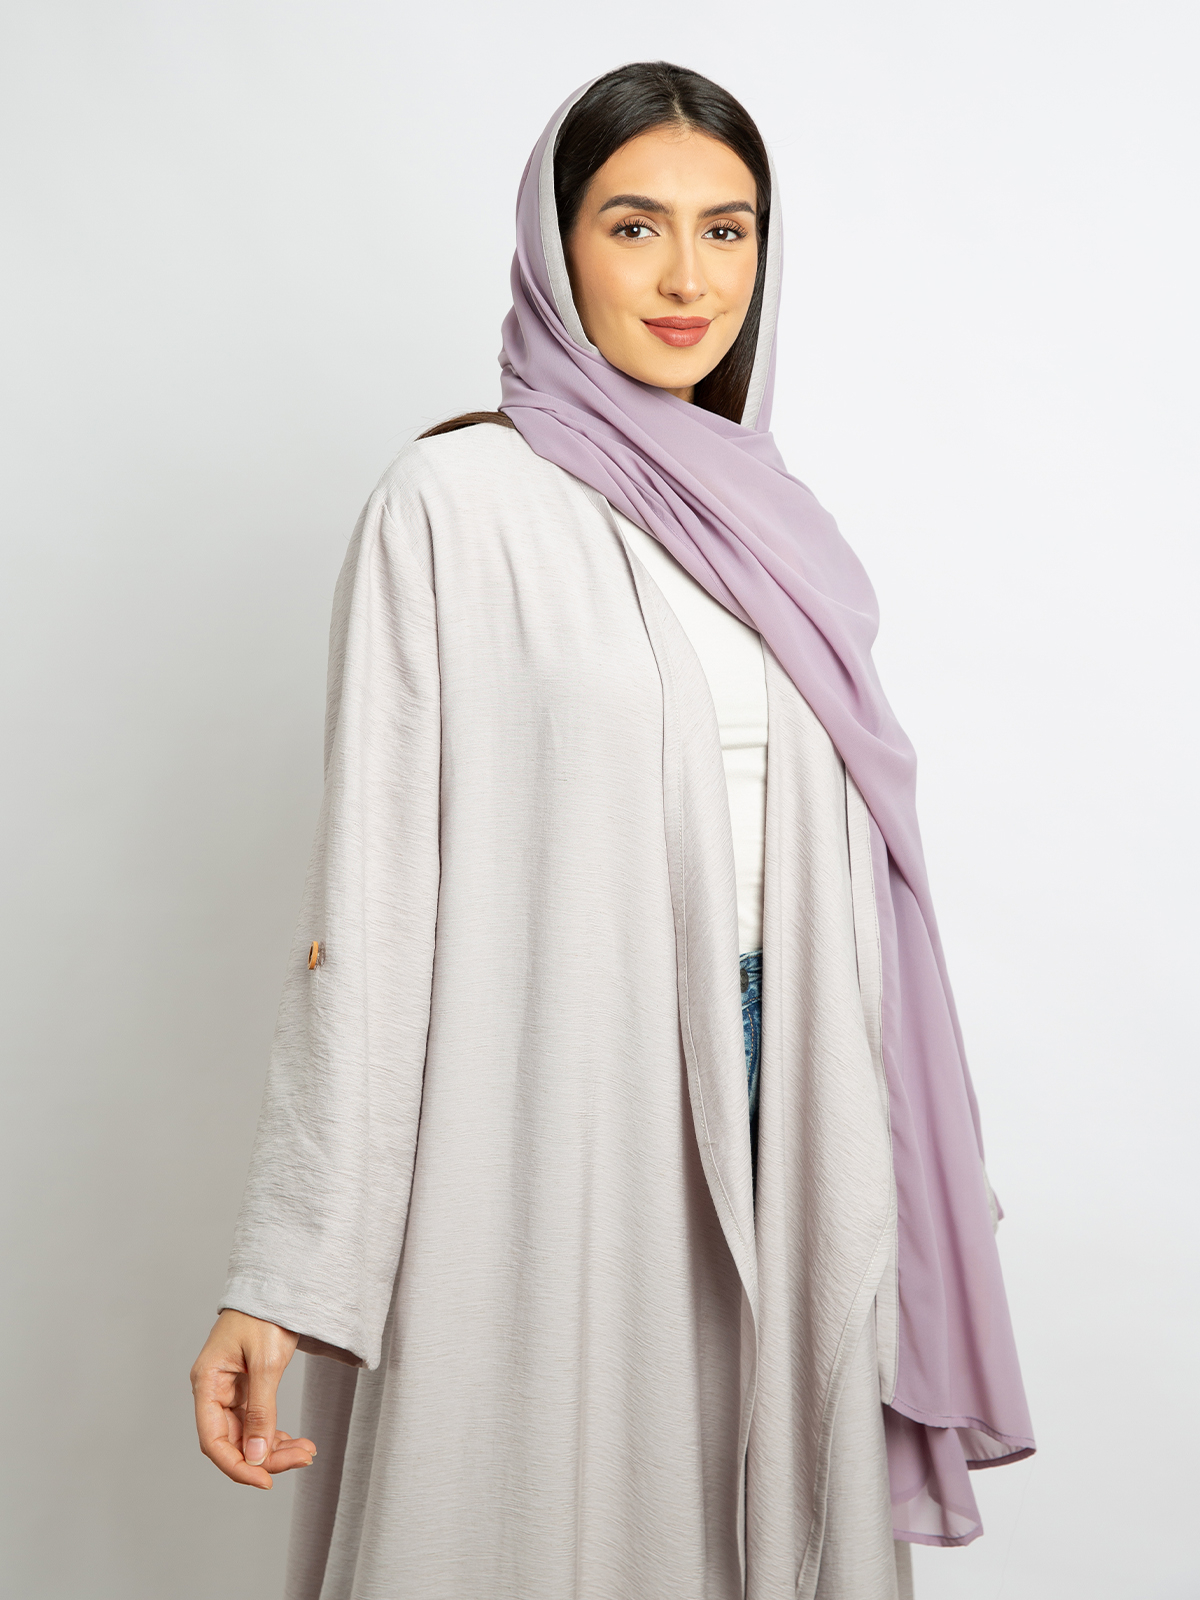 Open long wide cut comfy abaya with adjustable sleeves purple color in linen-feel fabric for work and events by kaafmeem